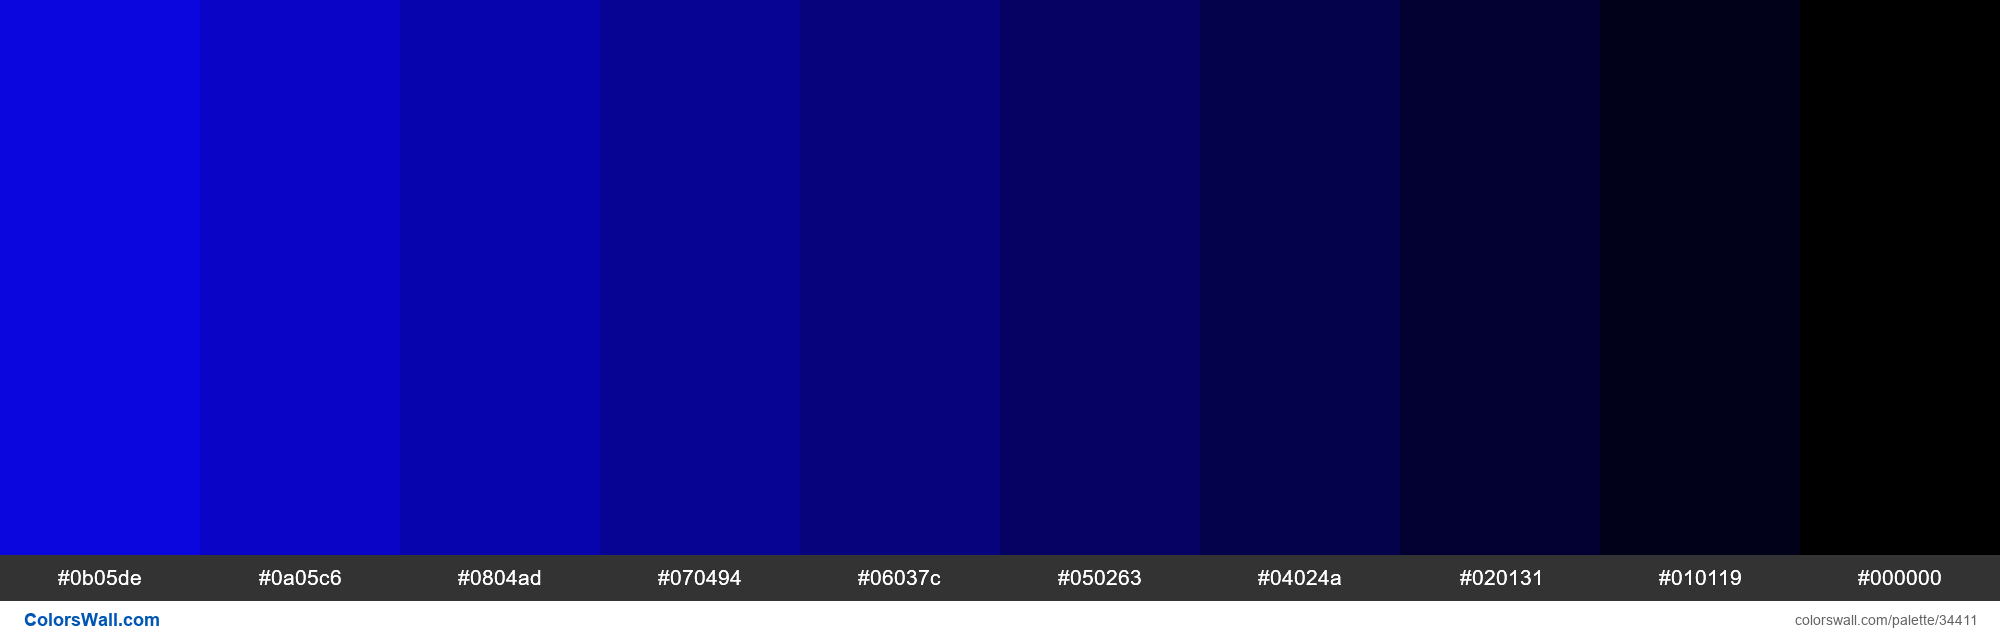 Shades XKCD Color strong blue #0c06f7 hex colors palette | ColorsWall